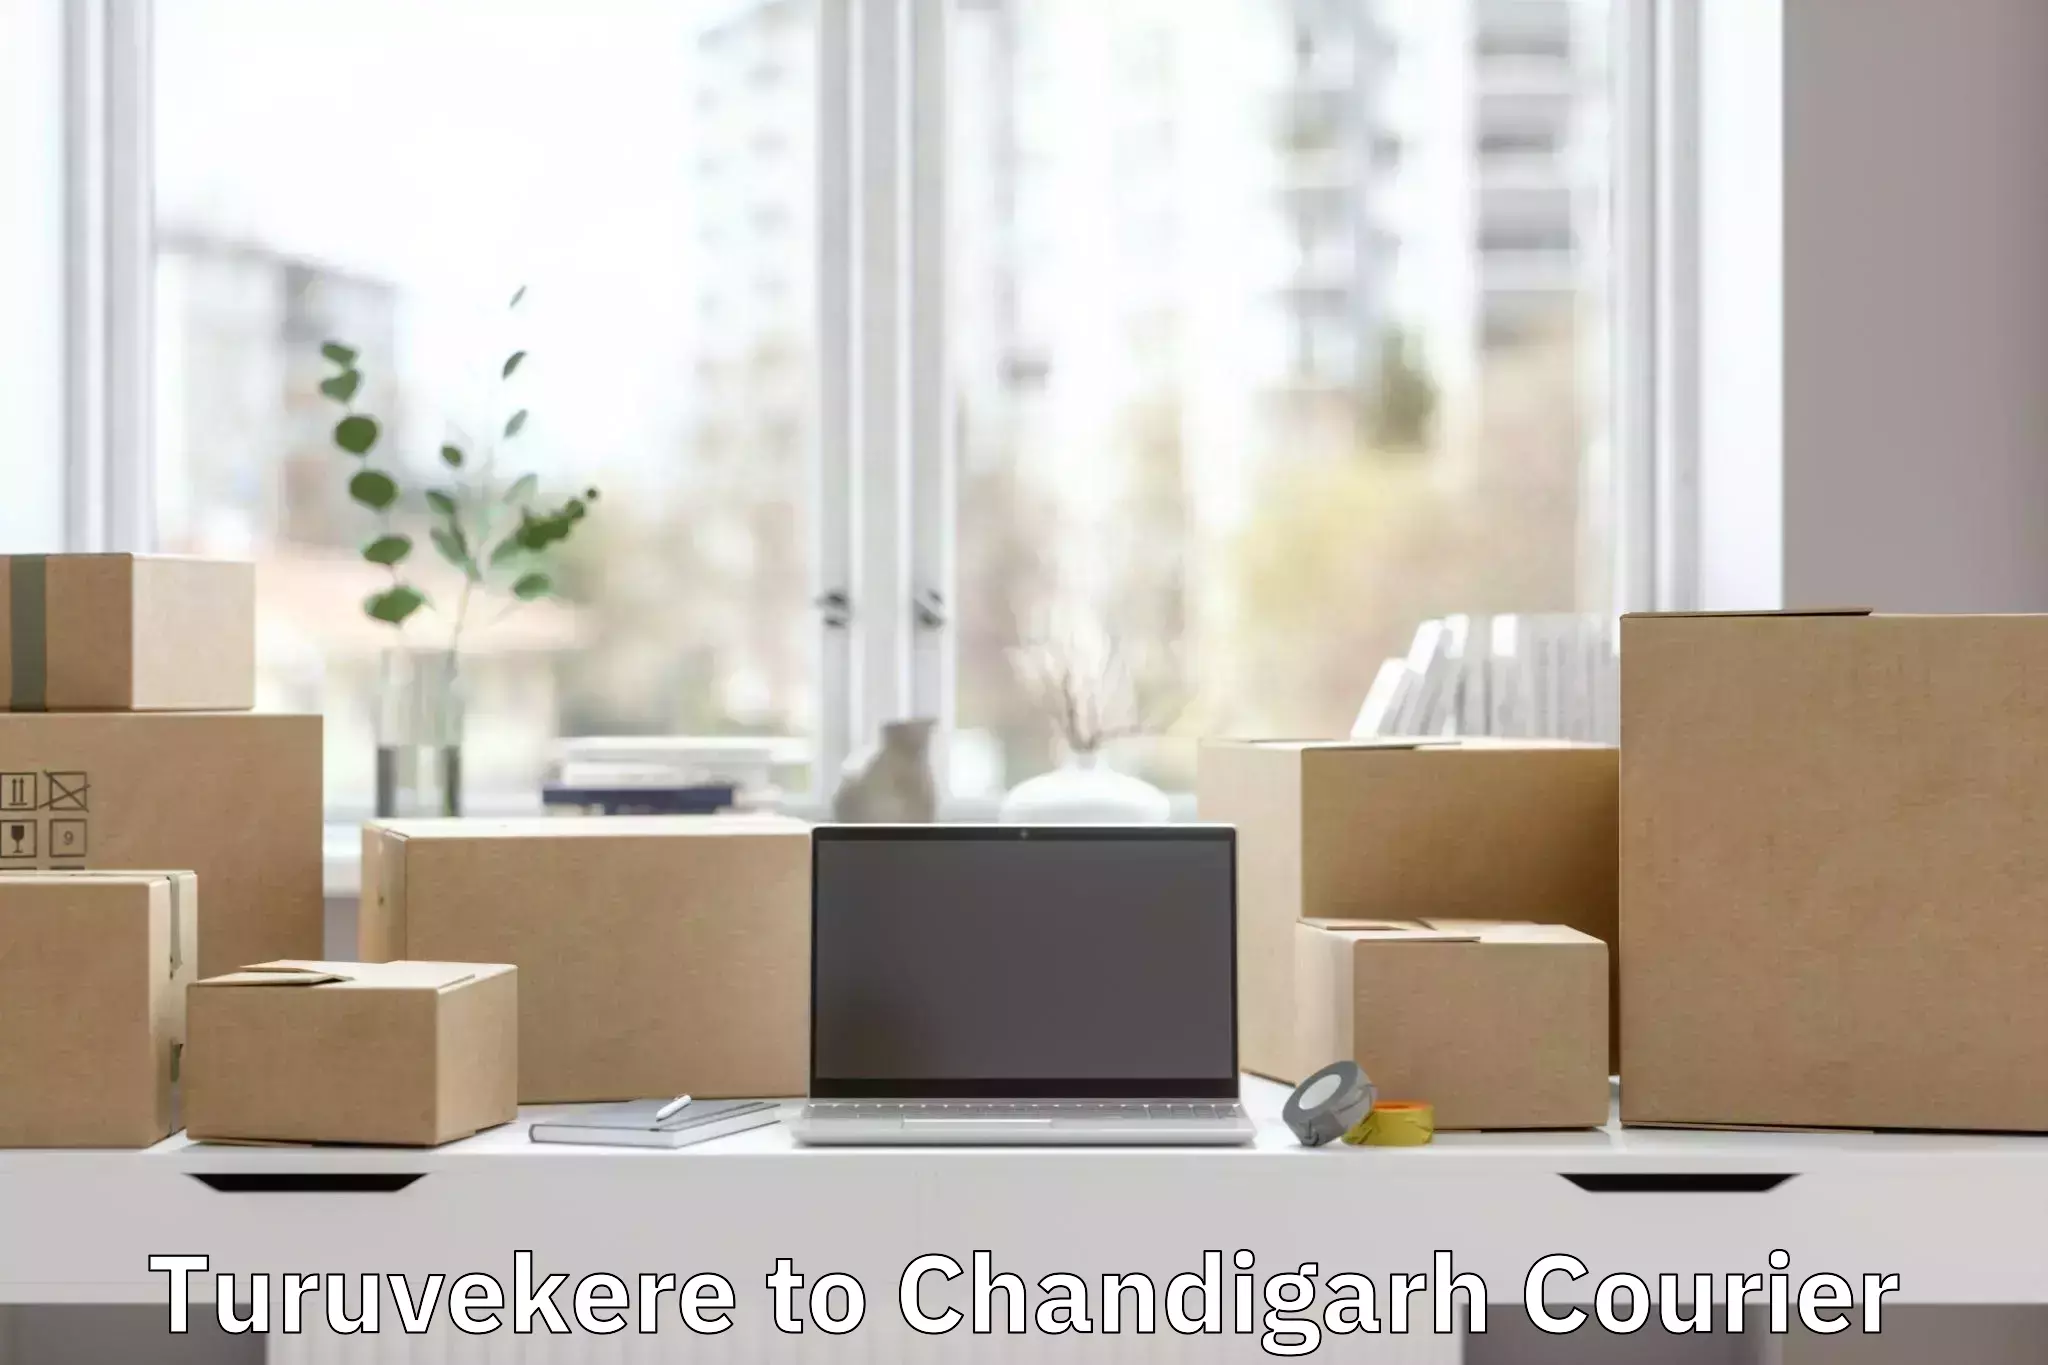 Business luggage transport Turuvekere to Chandigarh